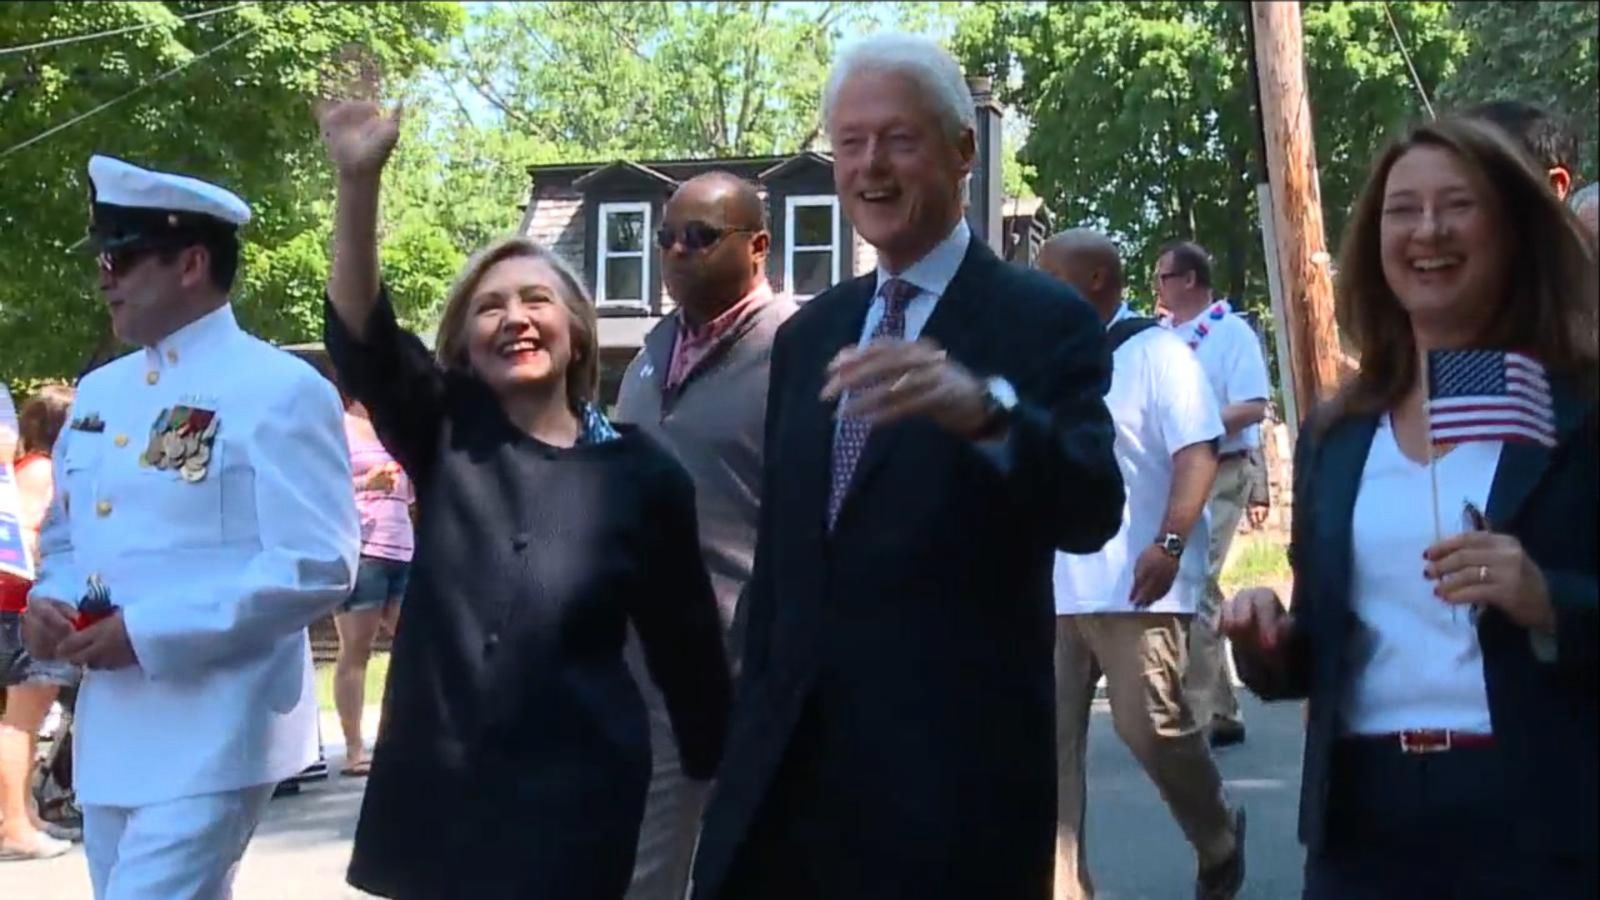 Hillary and Bill Clinton Make First Public Appearance Since Start of